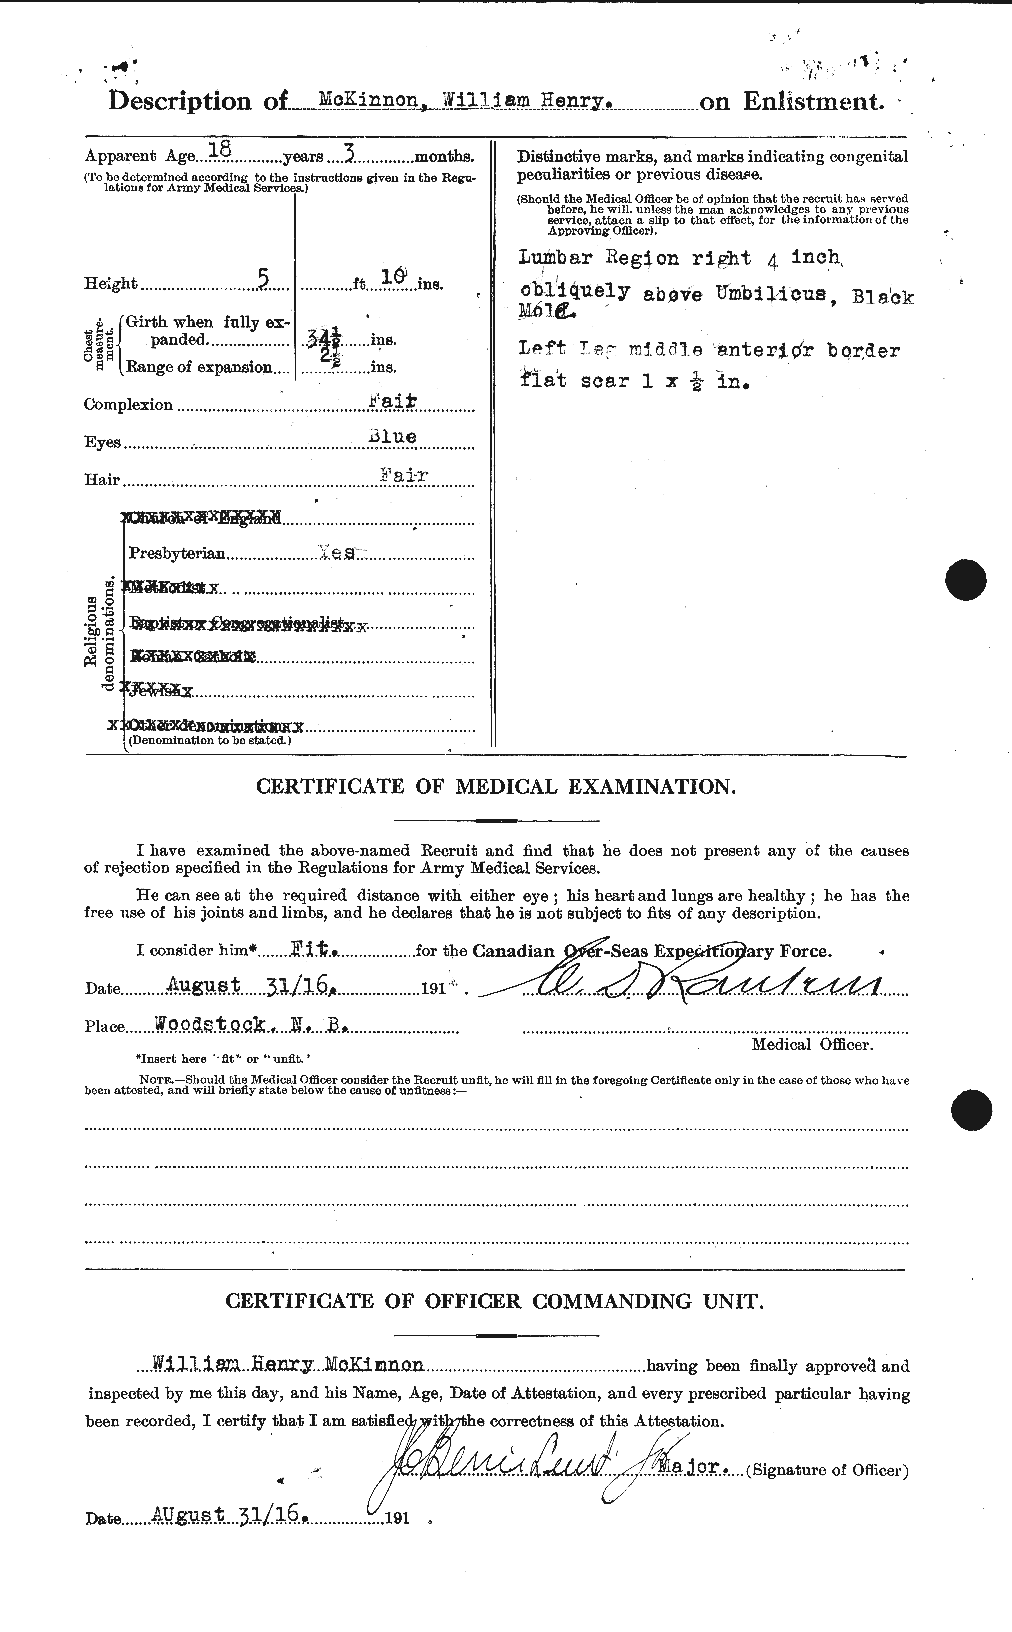 Personnel Records of the First World War - CEF 534329b